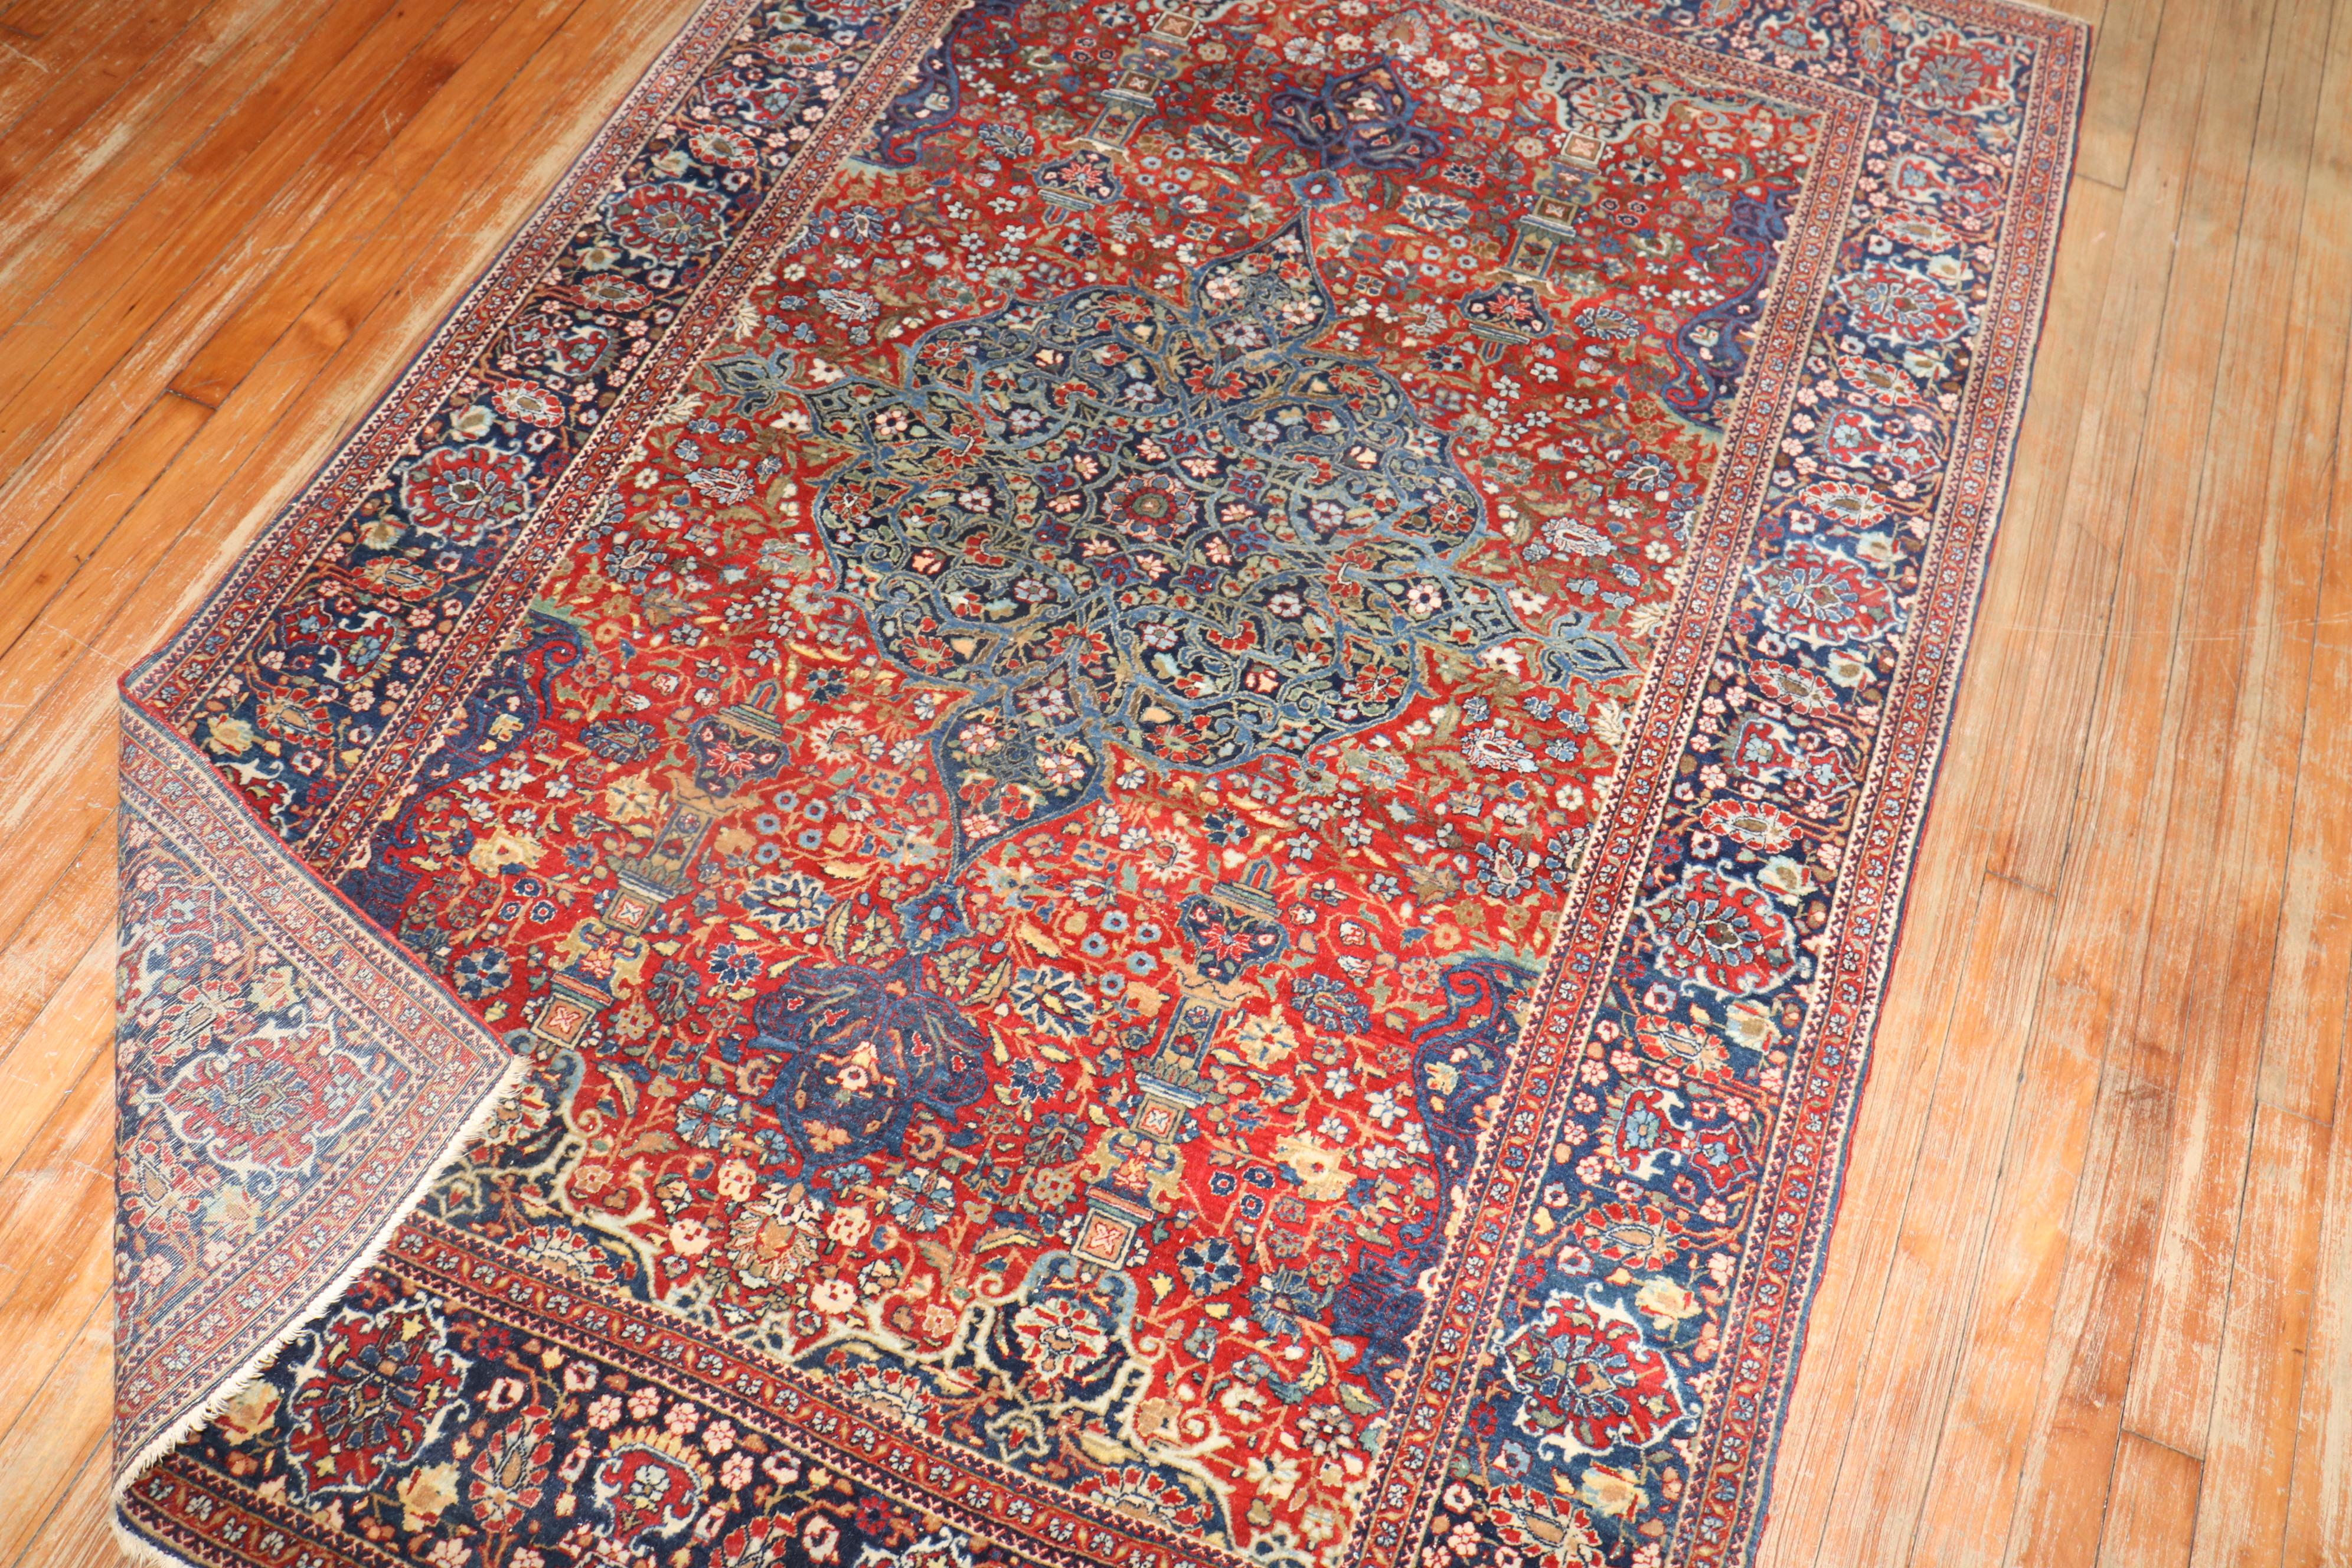 Collector Level Antique Persian Kashan Rug 1